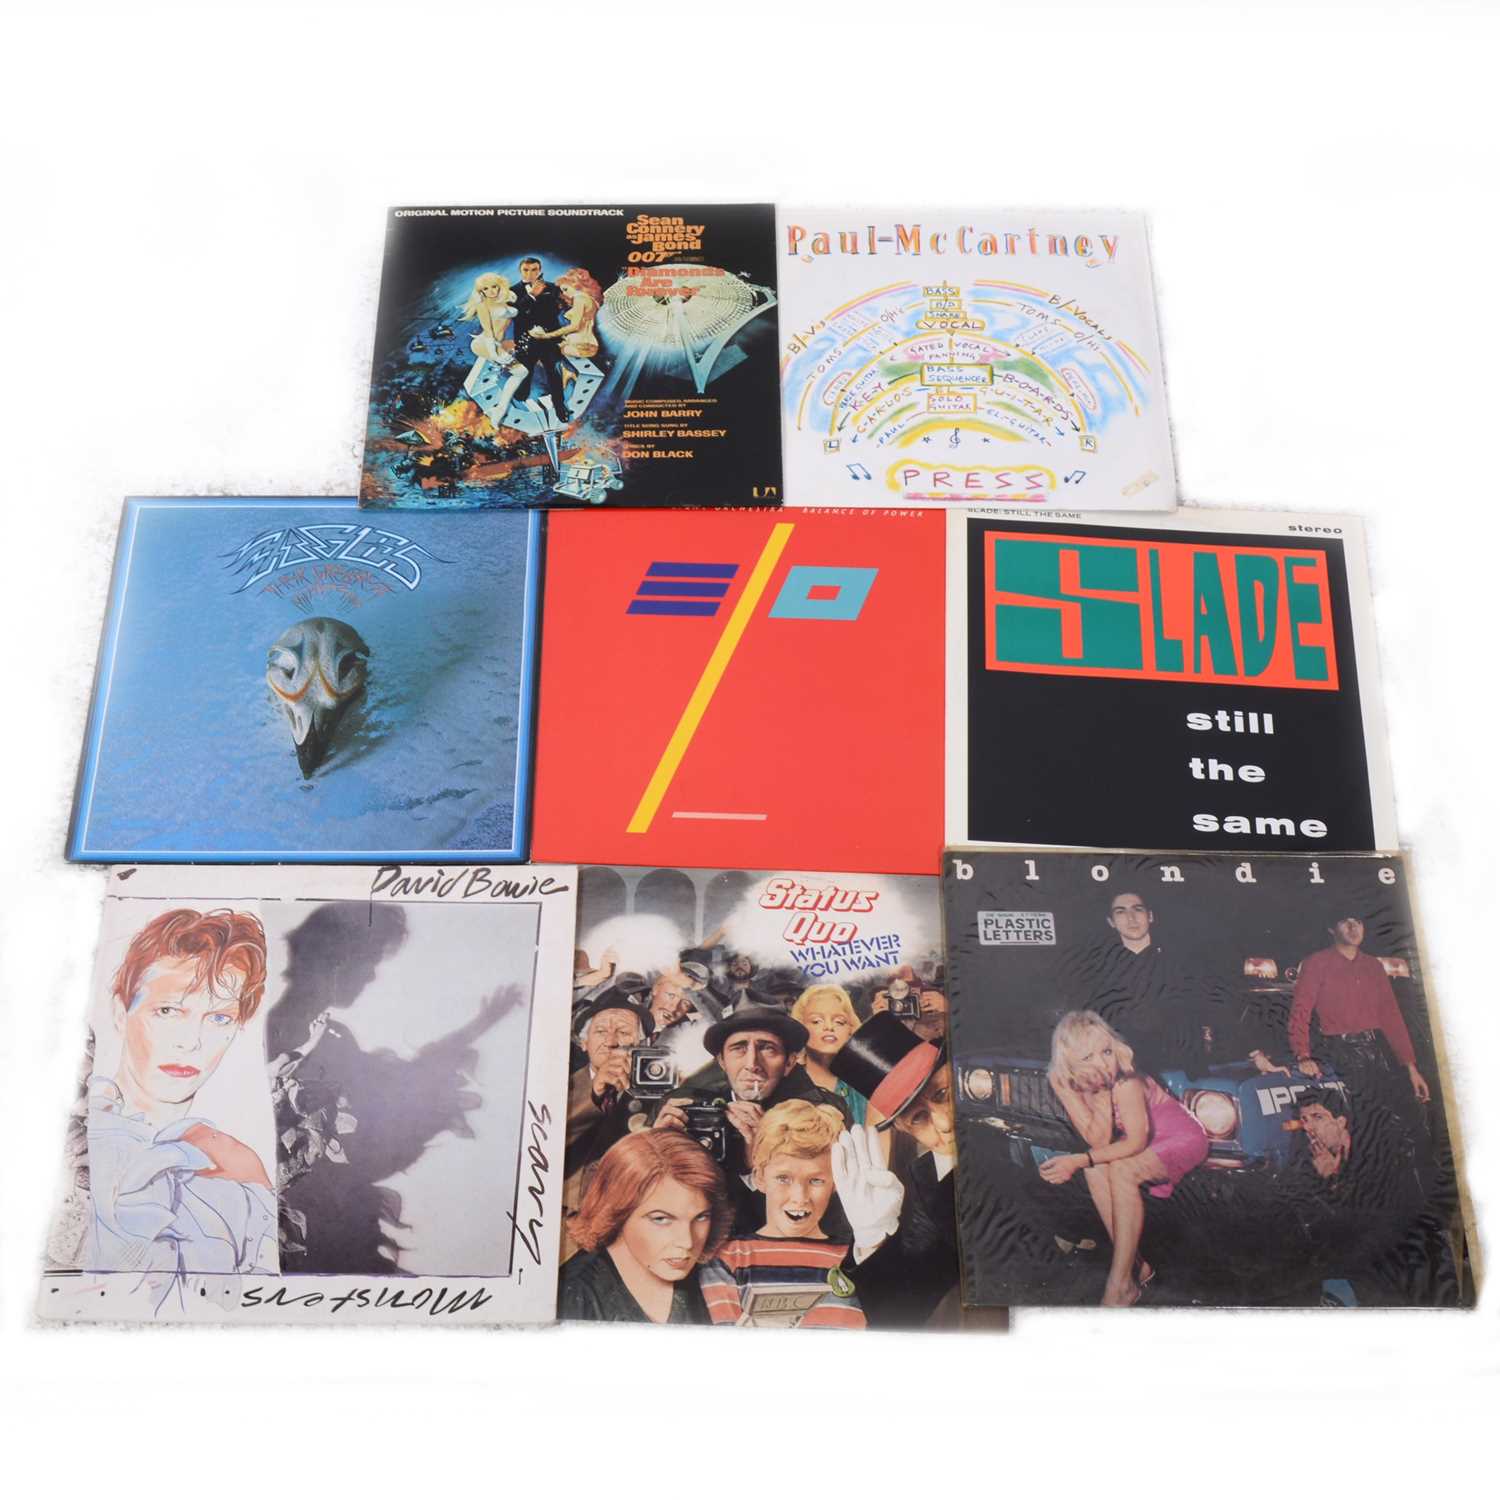 Lot 11 - Aprox 95 vinyl LP and 12" singles; mostly pop and rock music.